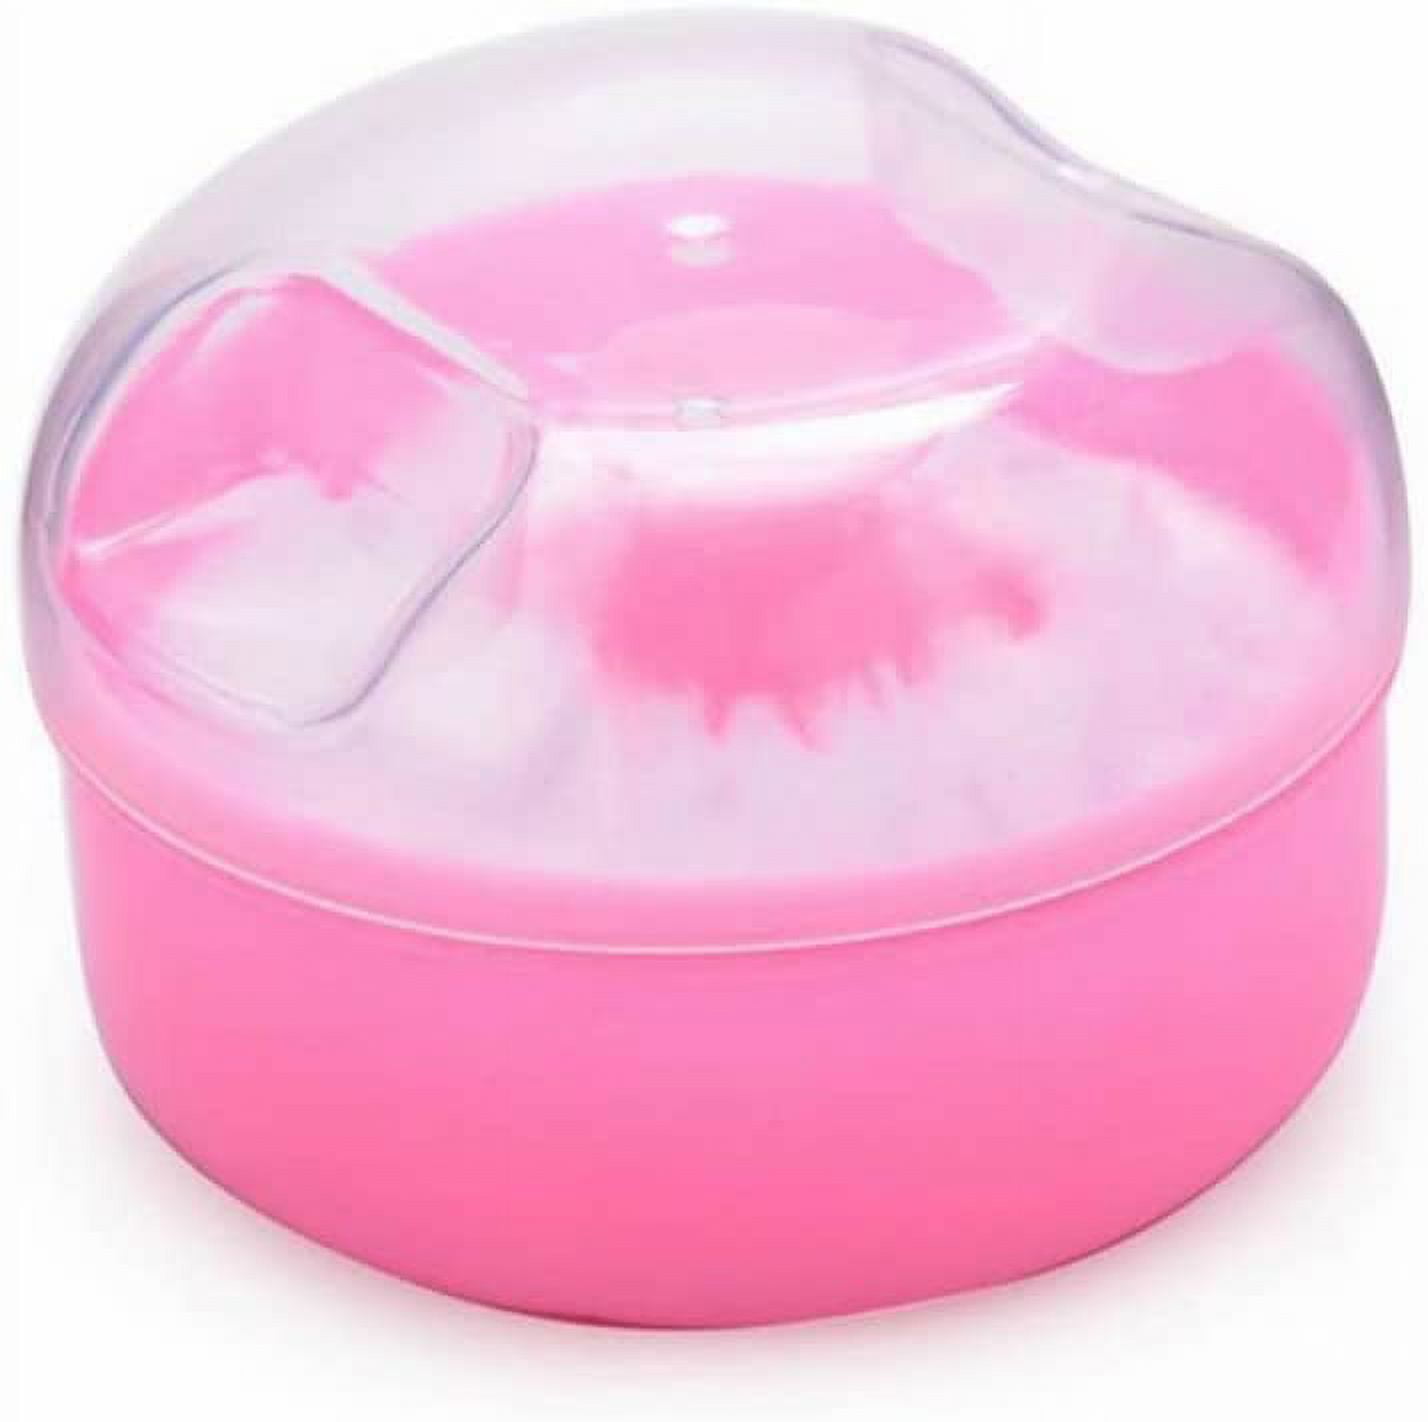 15g Empty Cosmetic Sifter Loose Powder Jar Container Makeup Box Travel Puff  S9Q5